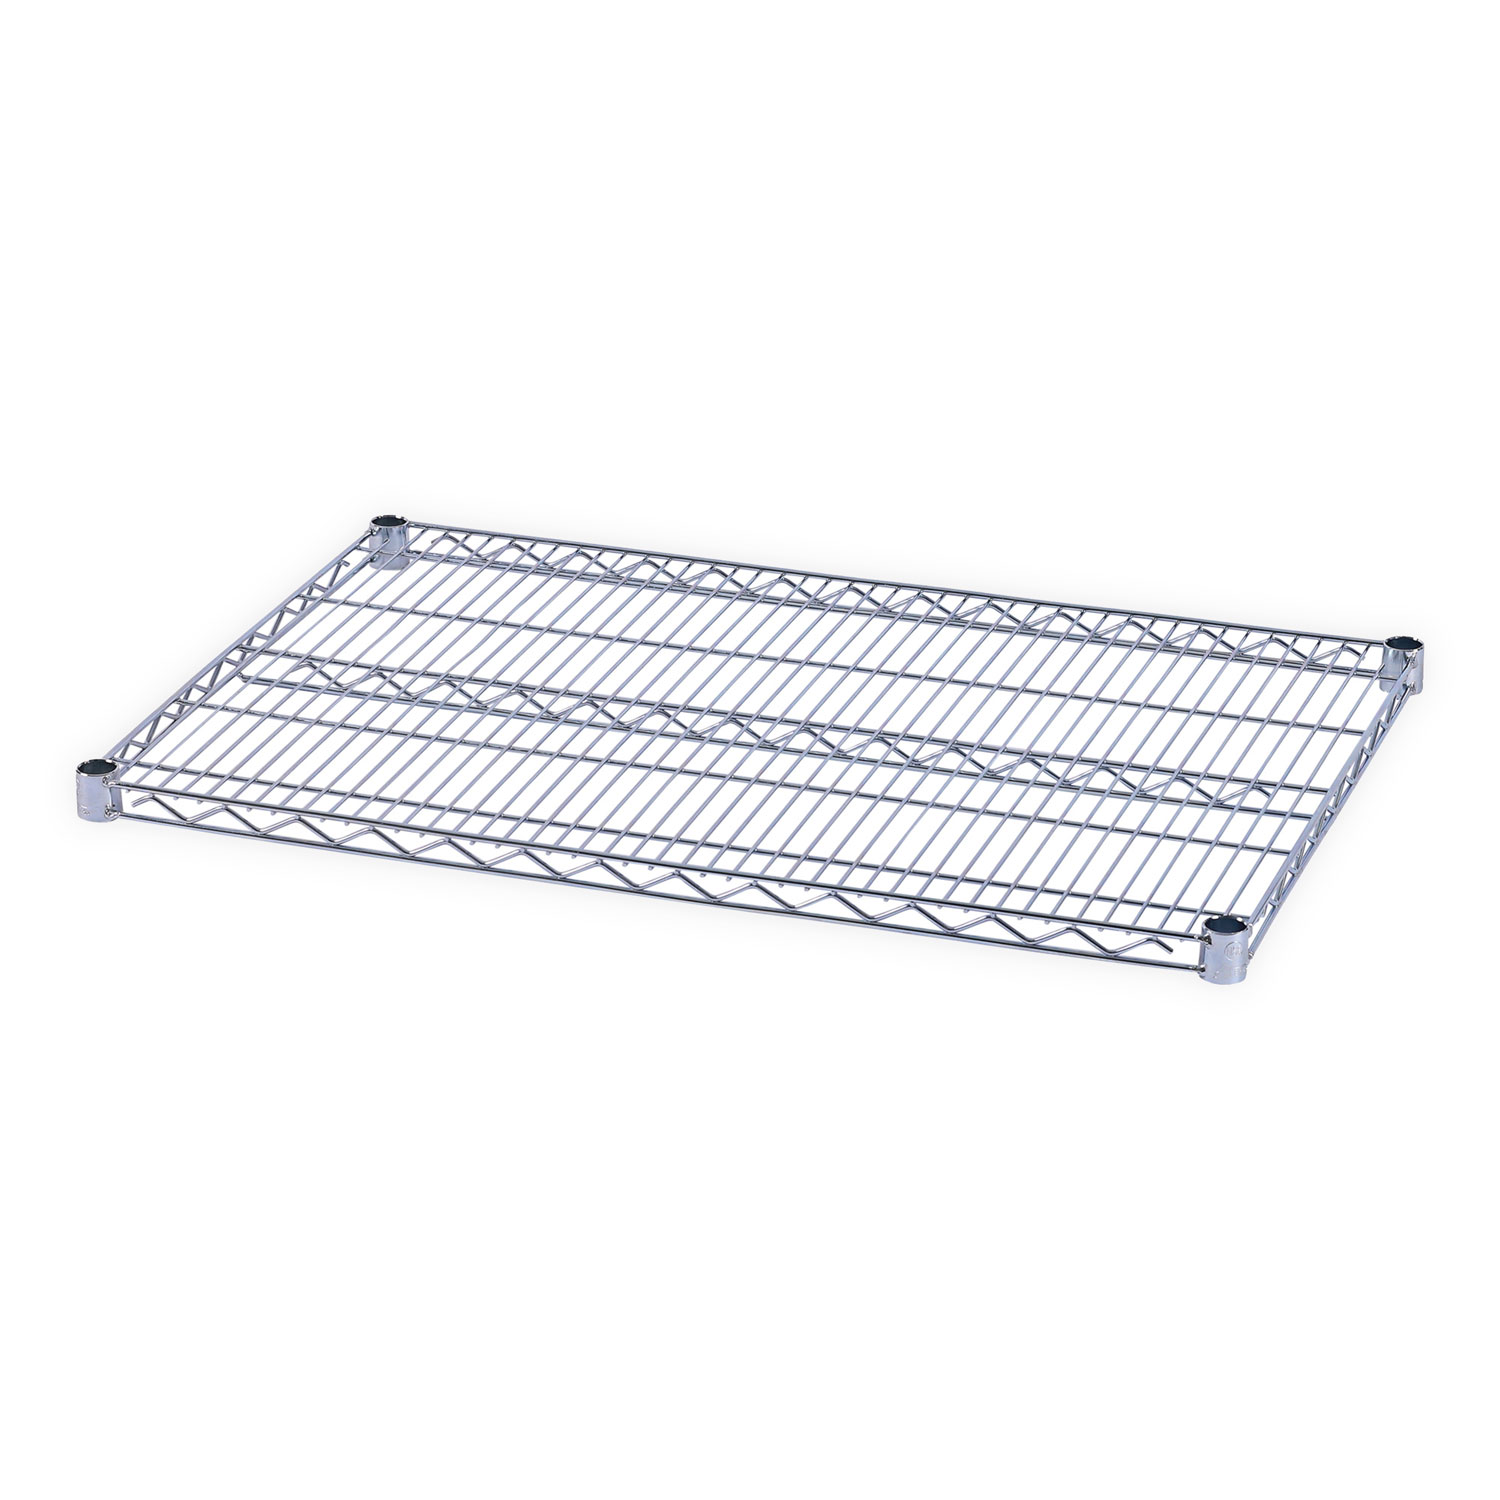 Alera Plastic Shelf Liners for Wire Shelving, Clear - 4 count